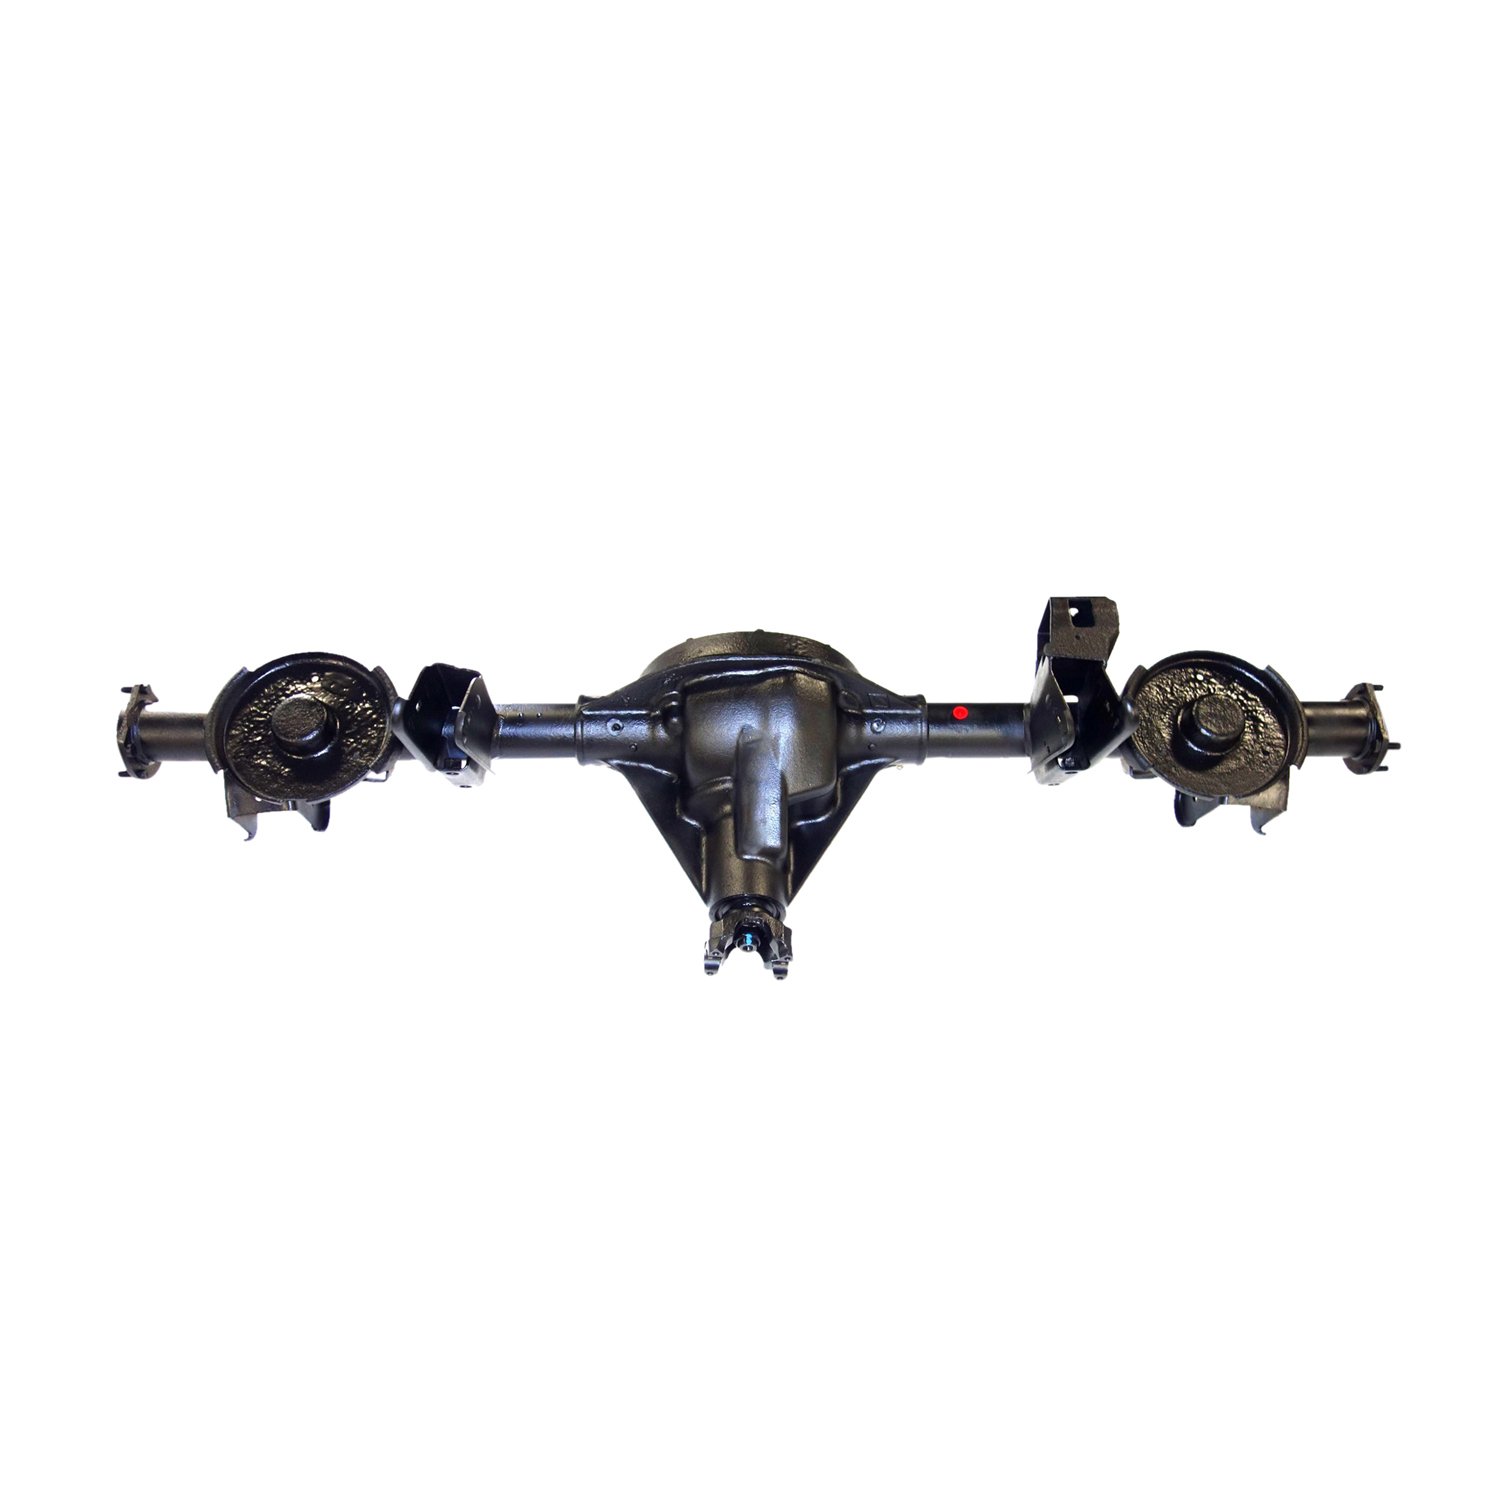 Remanufactured Complete Axle Assembly for Dana 35 97-02 Wrangler 3.55 w/o ABS, Posi LSD